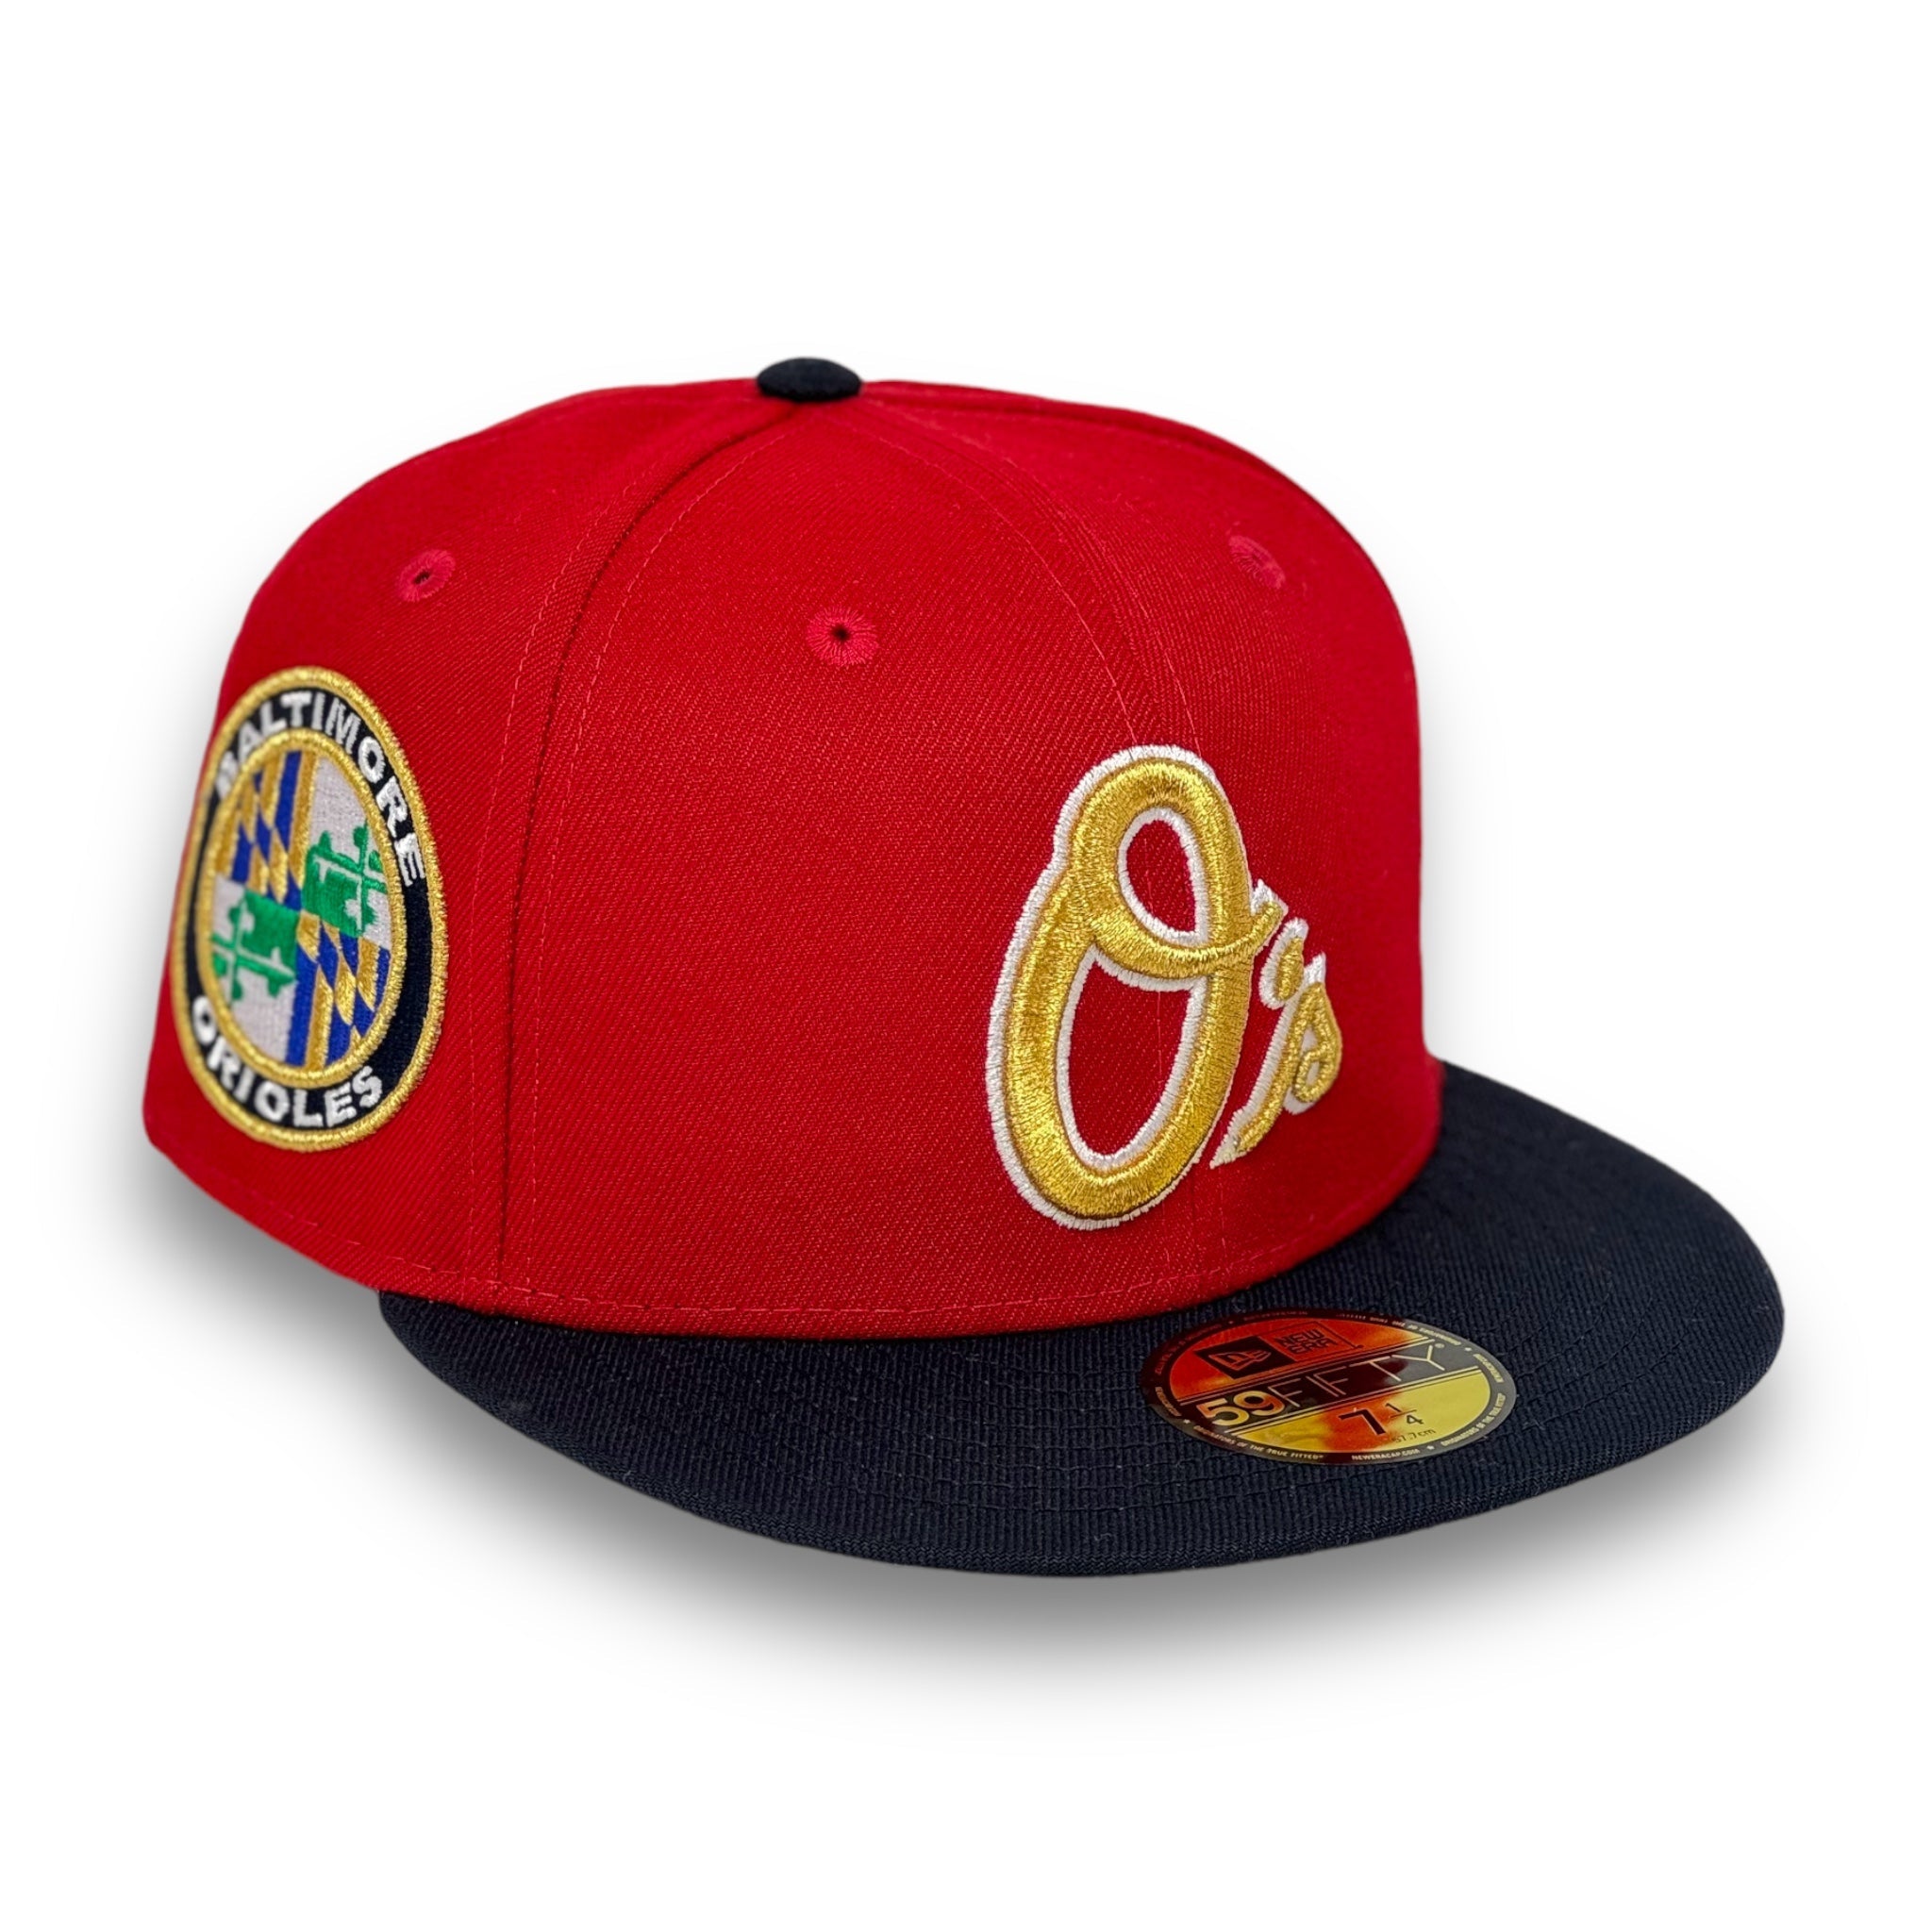 BALTIMORE ORIOLES CREST (RED) NEW ERA 59FIFTY EXCLUSIVE FITTED (PO)